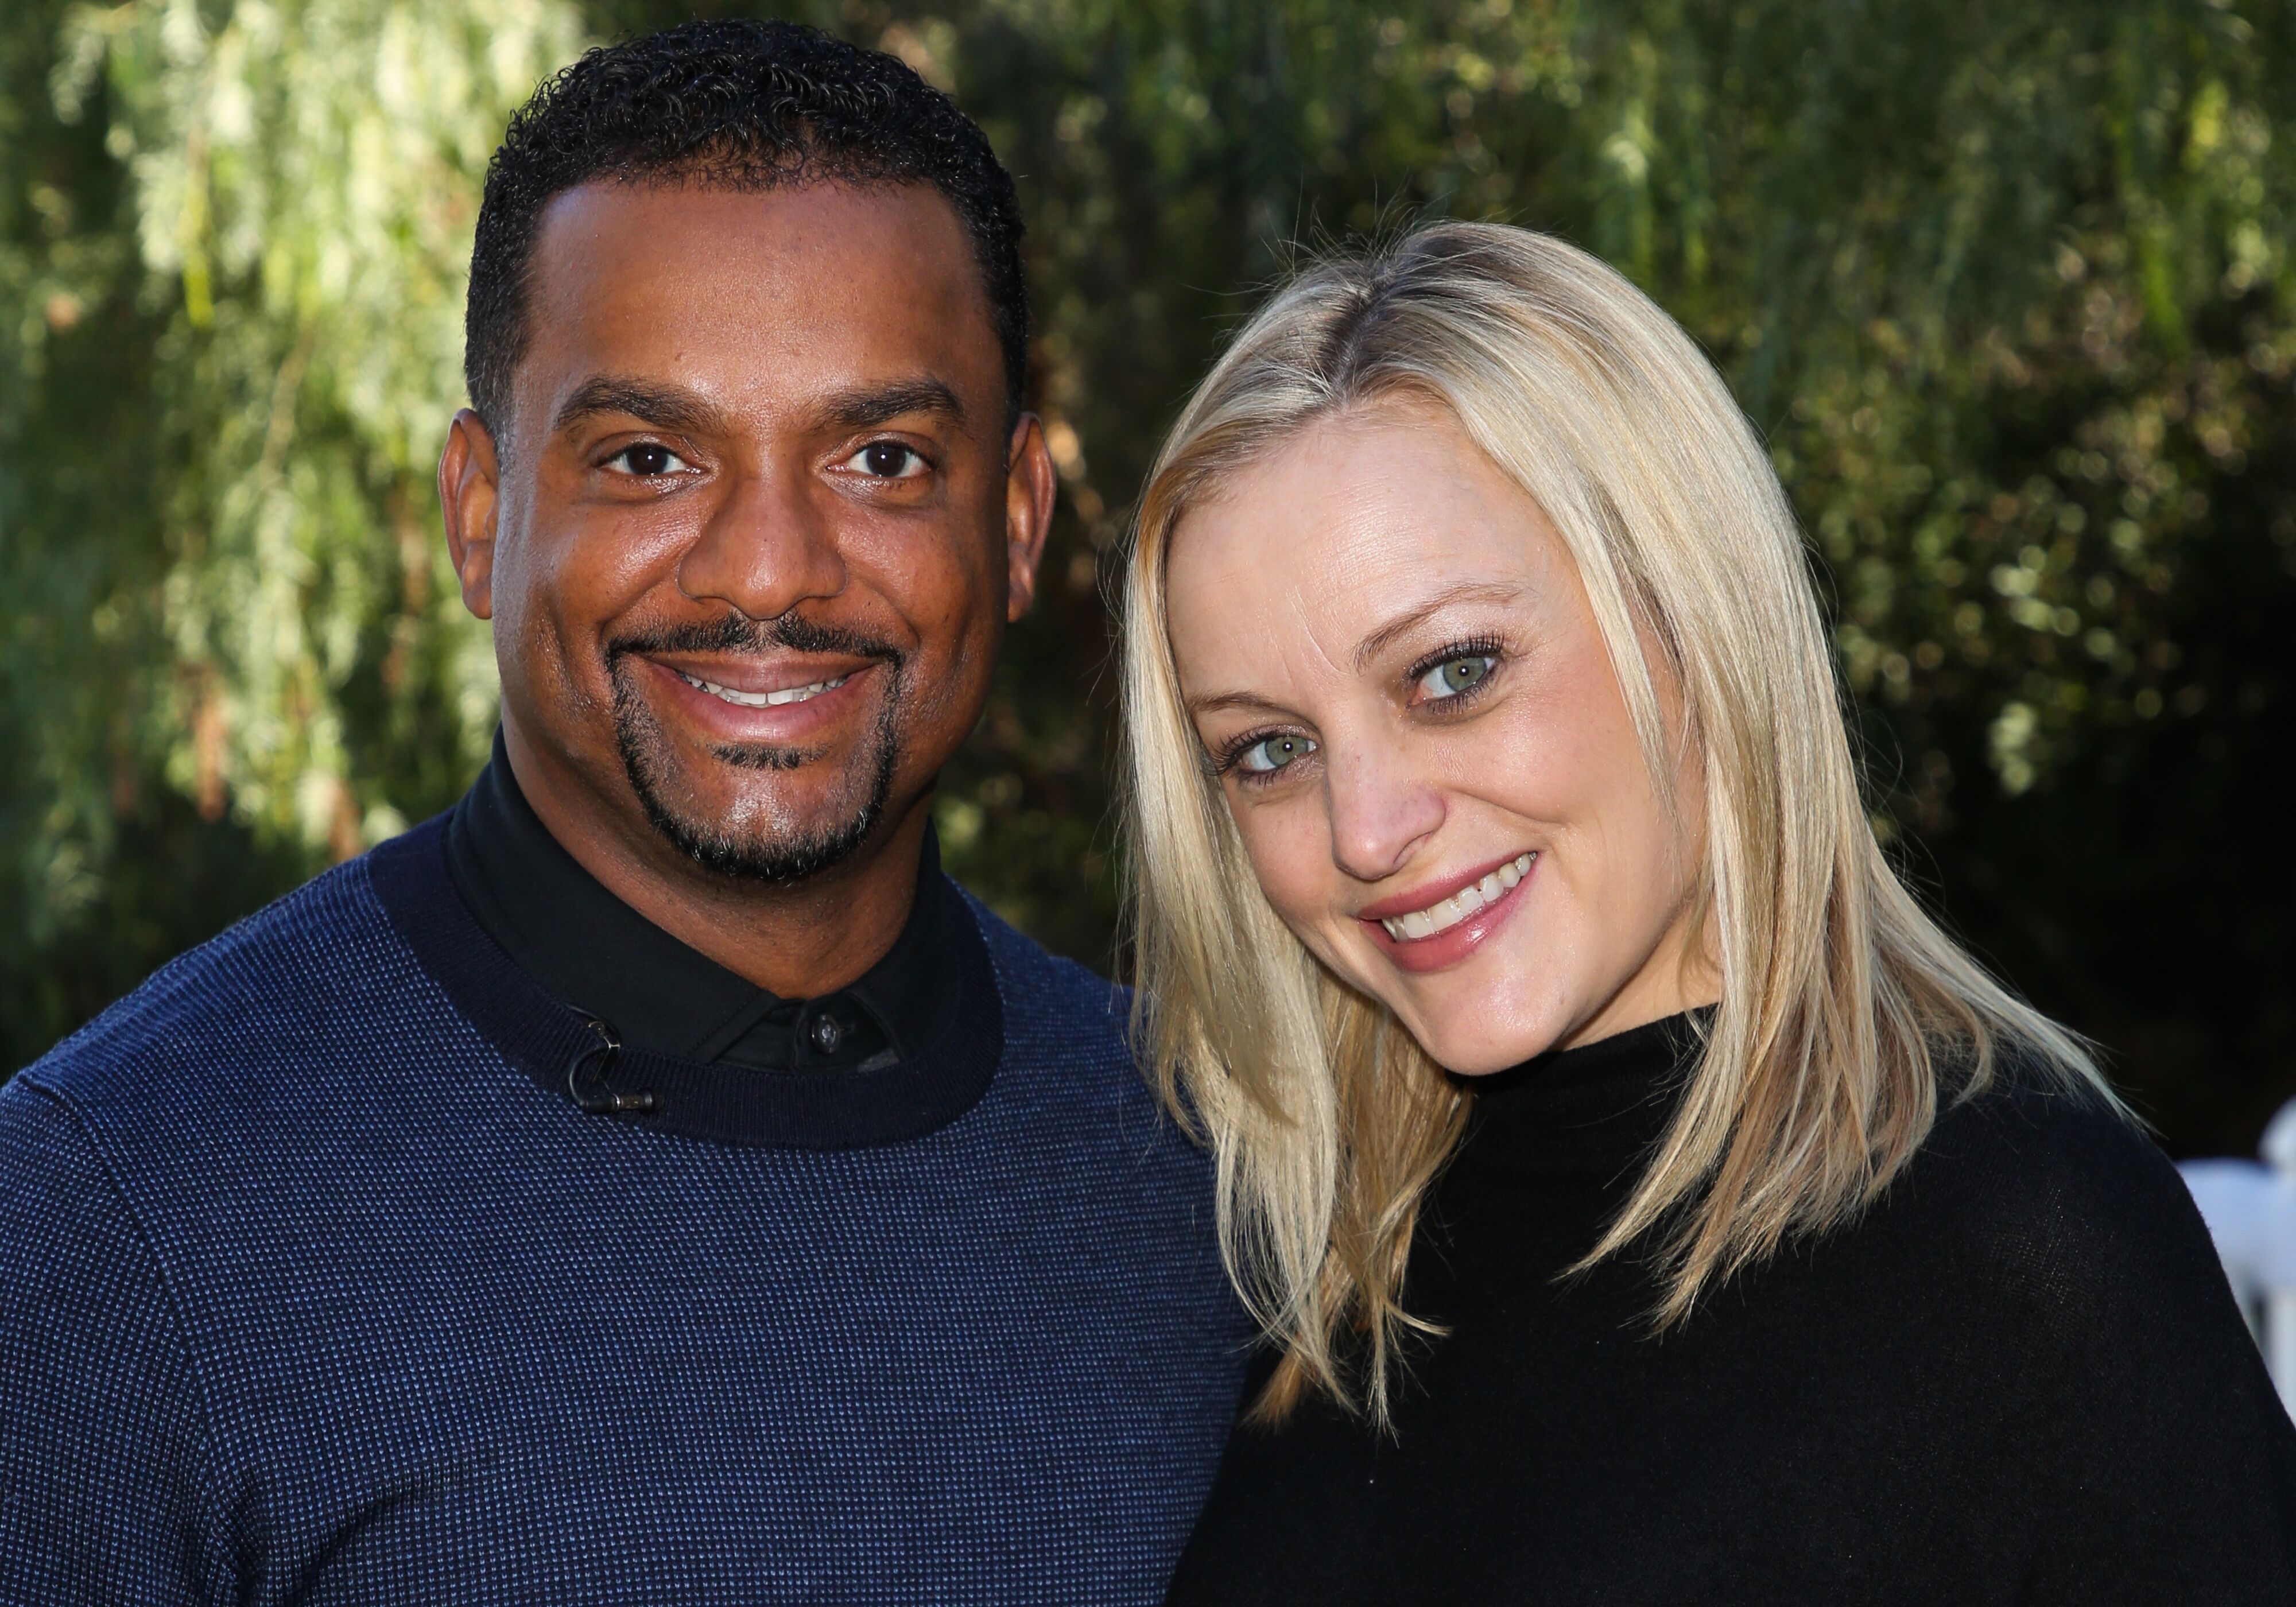 Actor Alfonso Ribeiro and his Wife Angela Unkrich visit Hallmark's "Home & Family" at Universal Studios Hollywood on December 15, 2018 | Photo: Getty Images